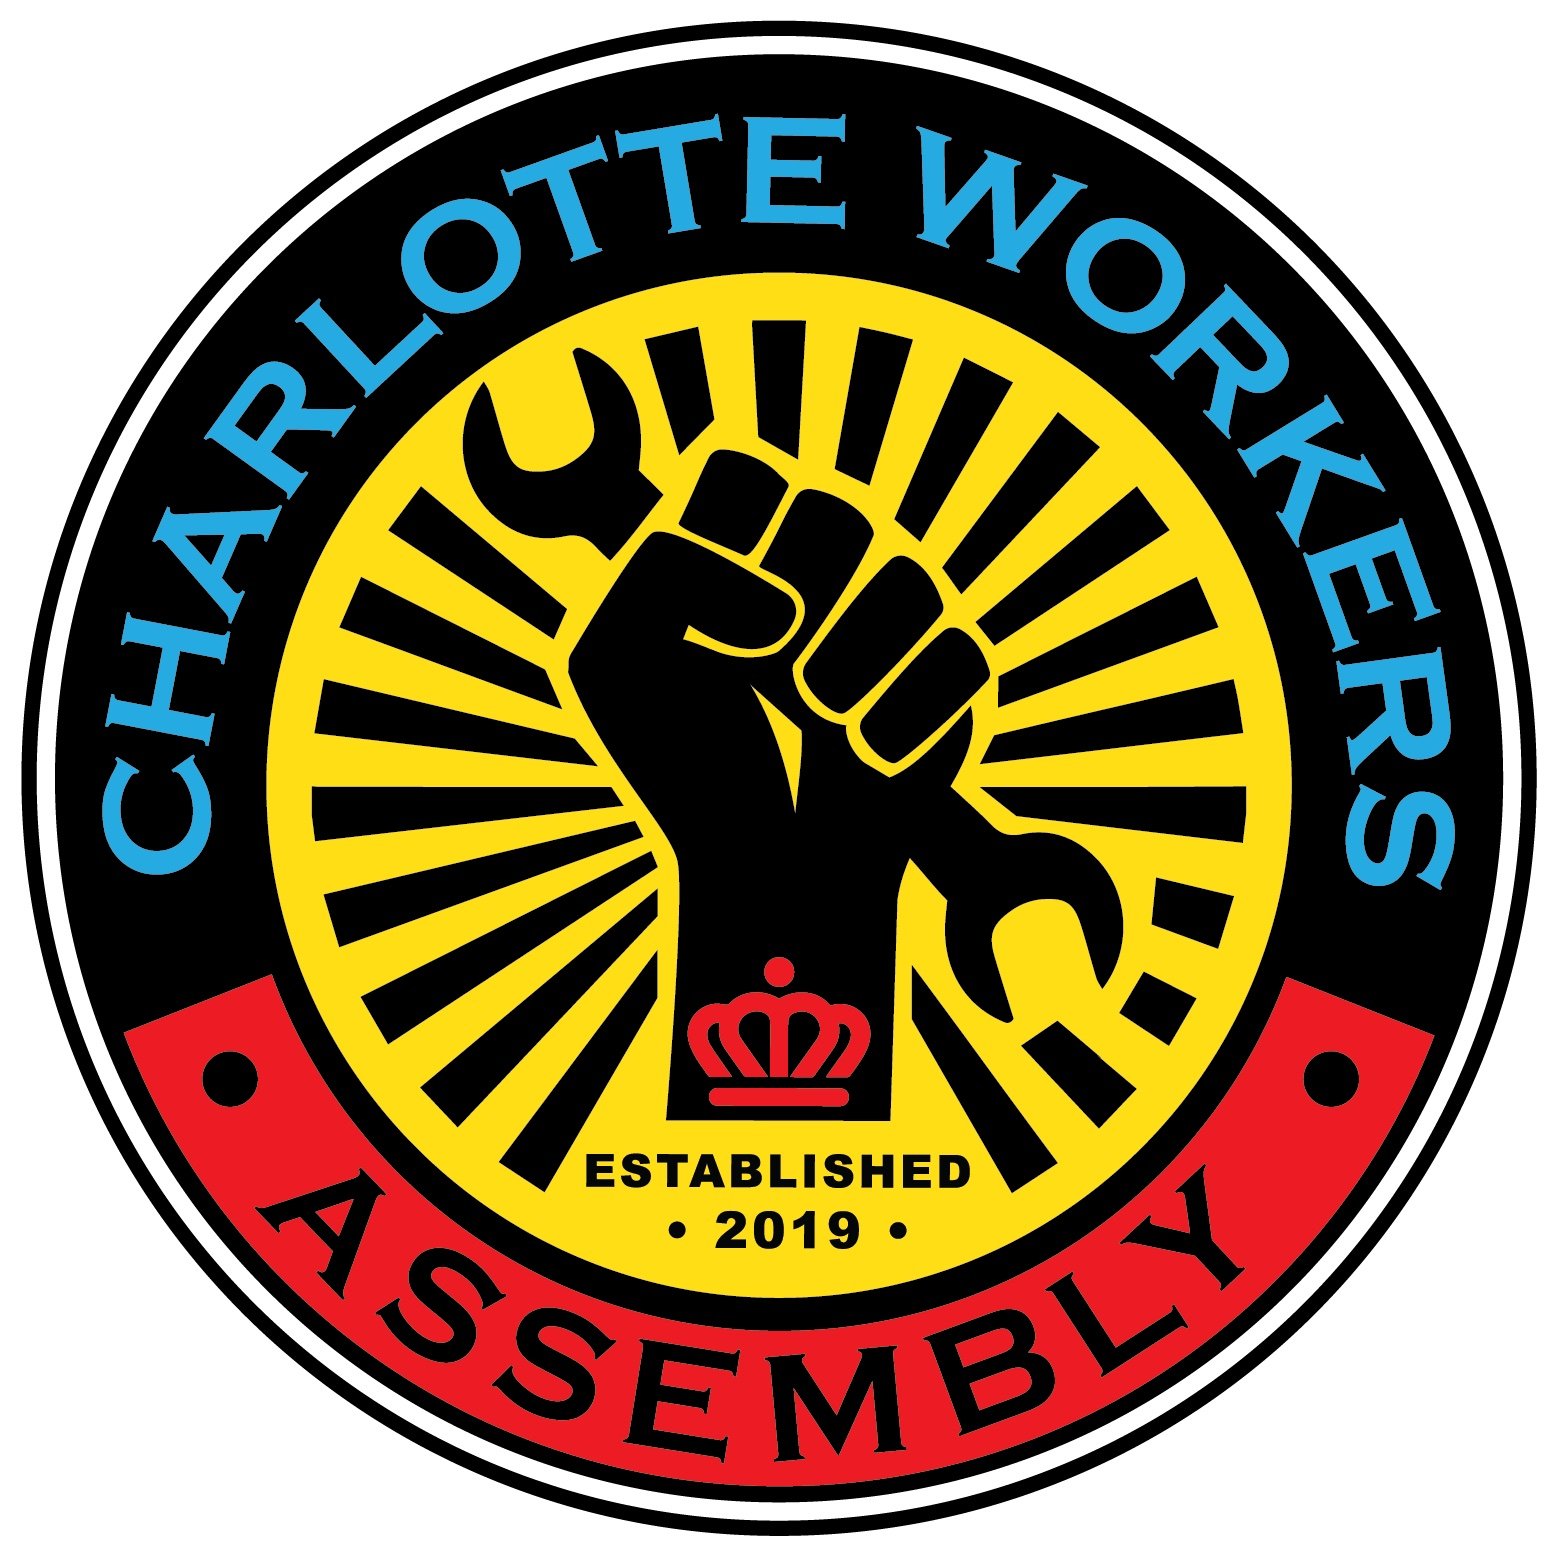 Charlotte Workers United. Advocating for labor. Fight to end this rigged economy. VOTE Together WE Win. #peopleoverprofits #resist #organizethesouth. #fbr